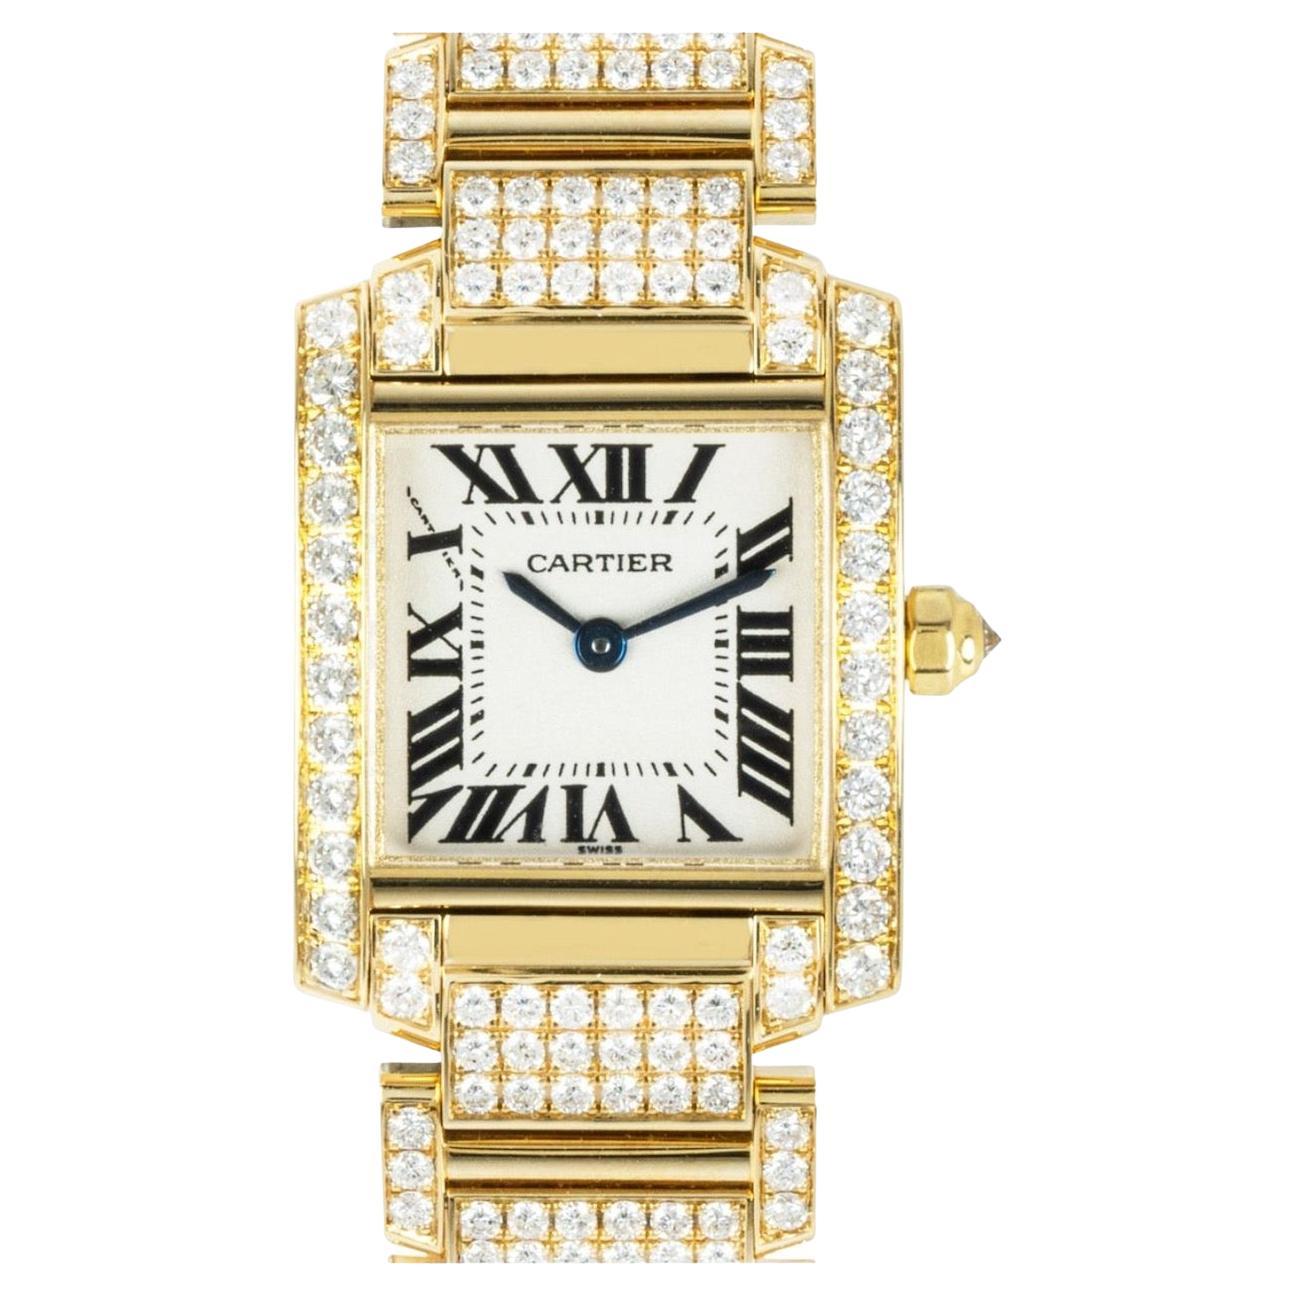 A stunning ladies 20mm Cartier Tank Francaise crafted in yellow gold. Features a silver dial with applied roman numerals, blued-steel sword-shaped hands and a secret Cartier signature at X. Complementing the dial is a yellow gold bezel set with